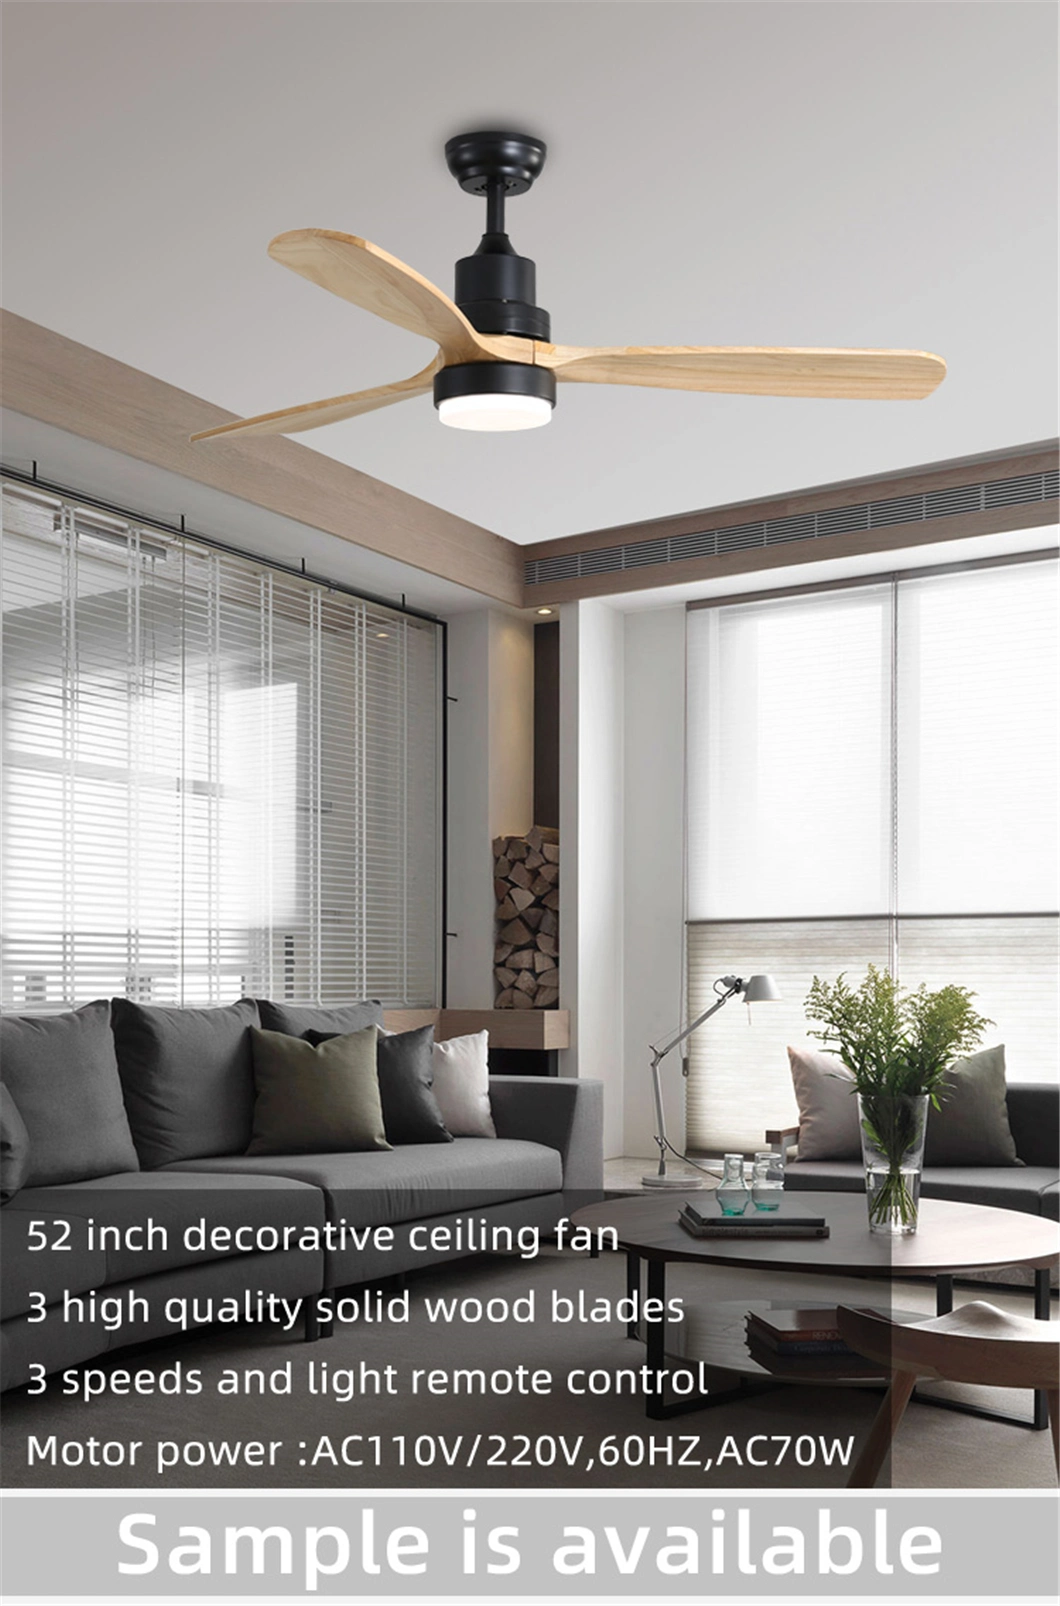 Modern Decorative Remote Control 220V 240V 52 Inch Wood Blades Fan with Light for ceiling